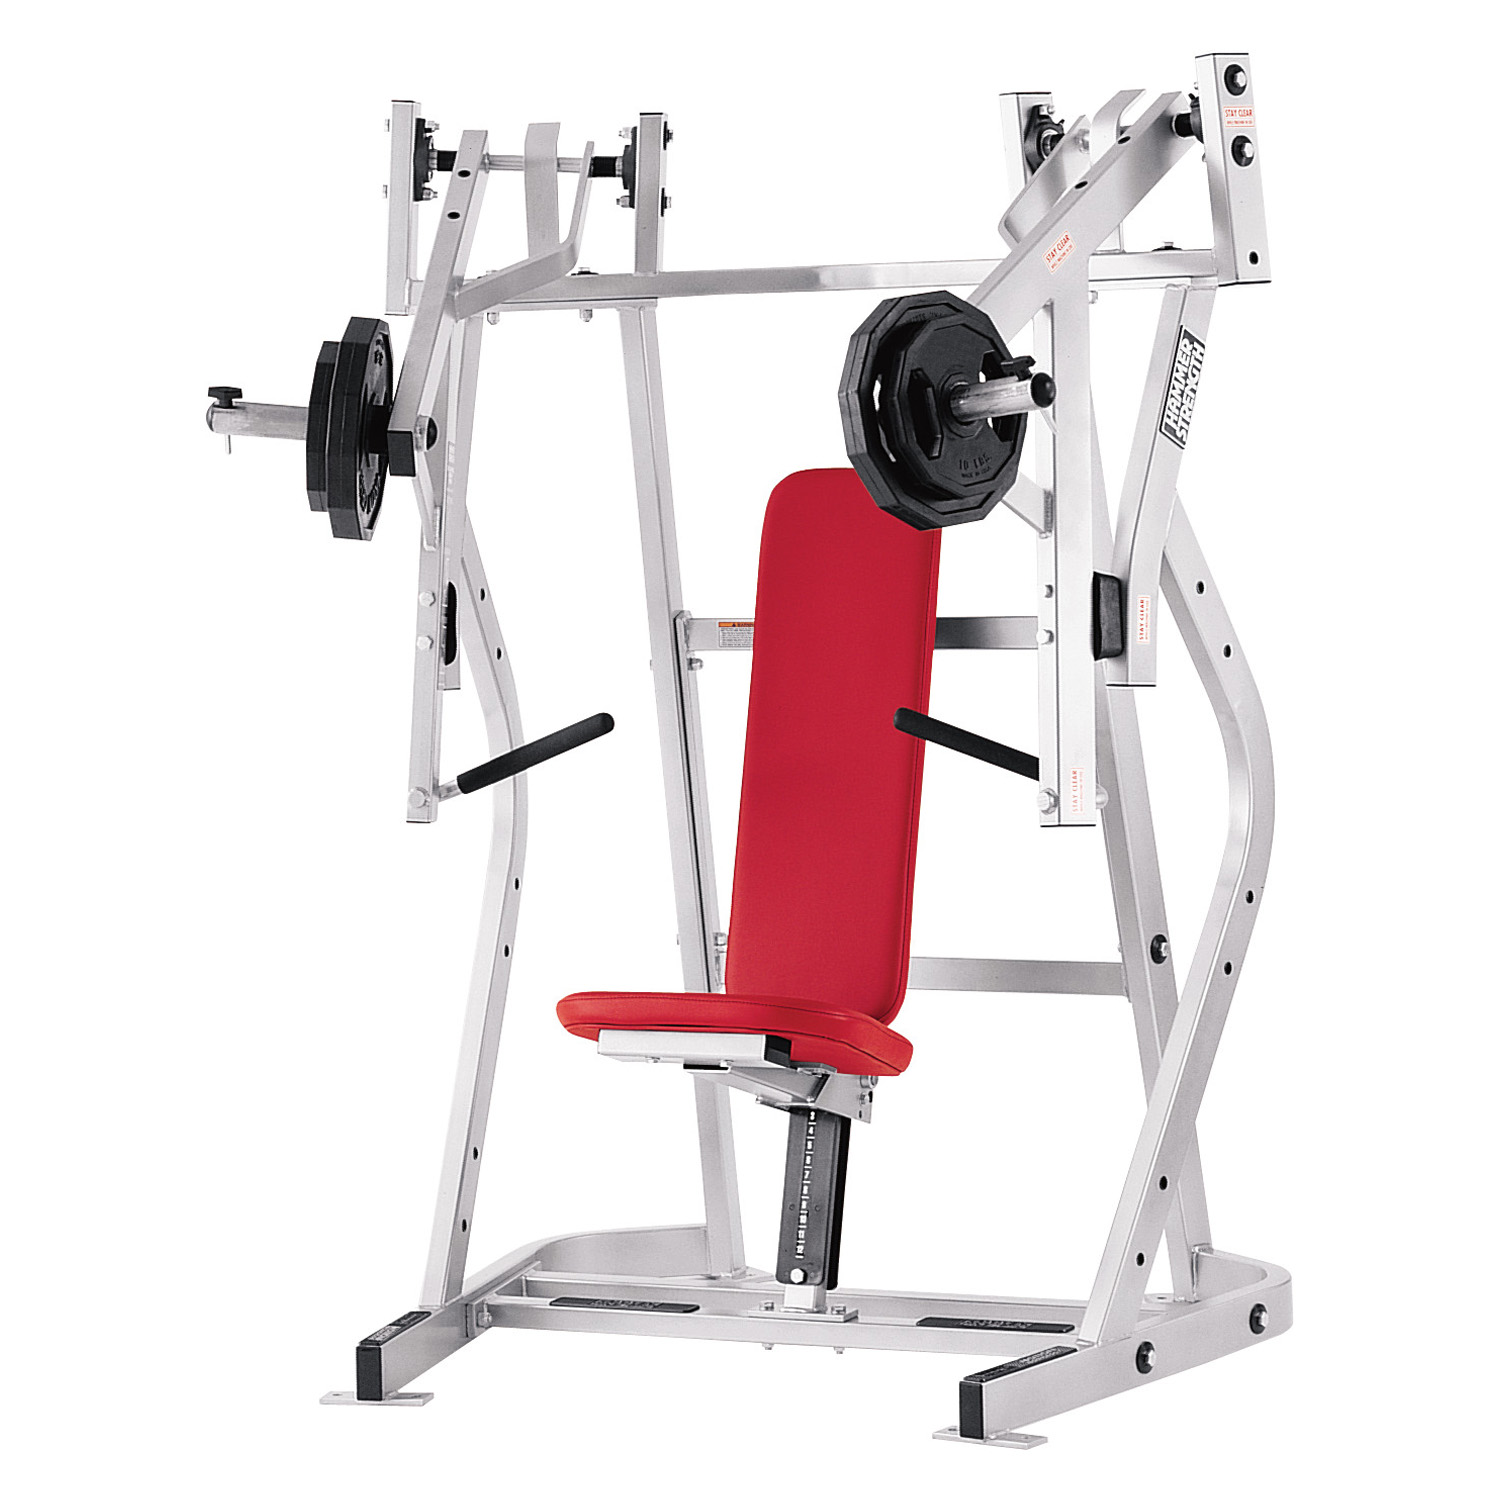 Грудной жим сидя Hammer Series Iso-Lateral Bench Press HS-3001